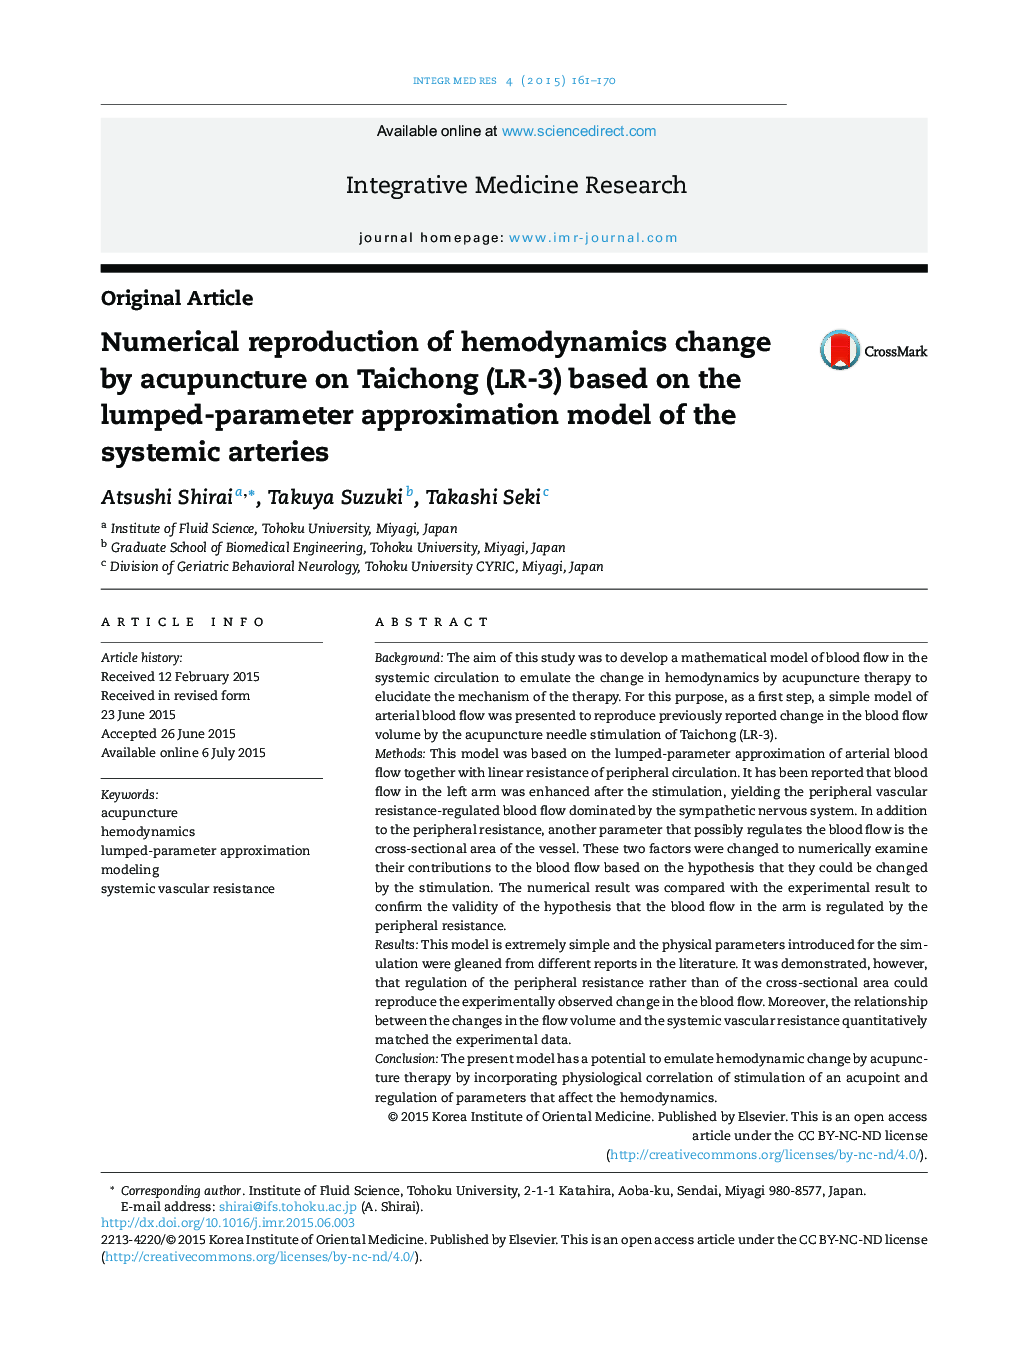 Numerical reproduction of hemodynamics change by acupuncture on Taichong (LR-3) based on the lumped-parameter approximation model of the systemic arteries